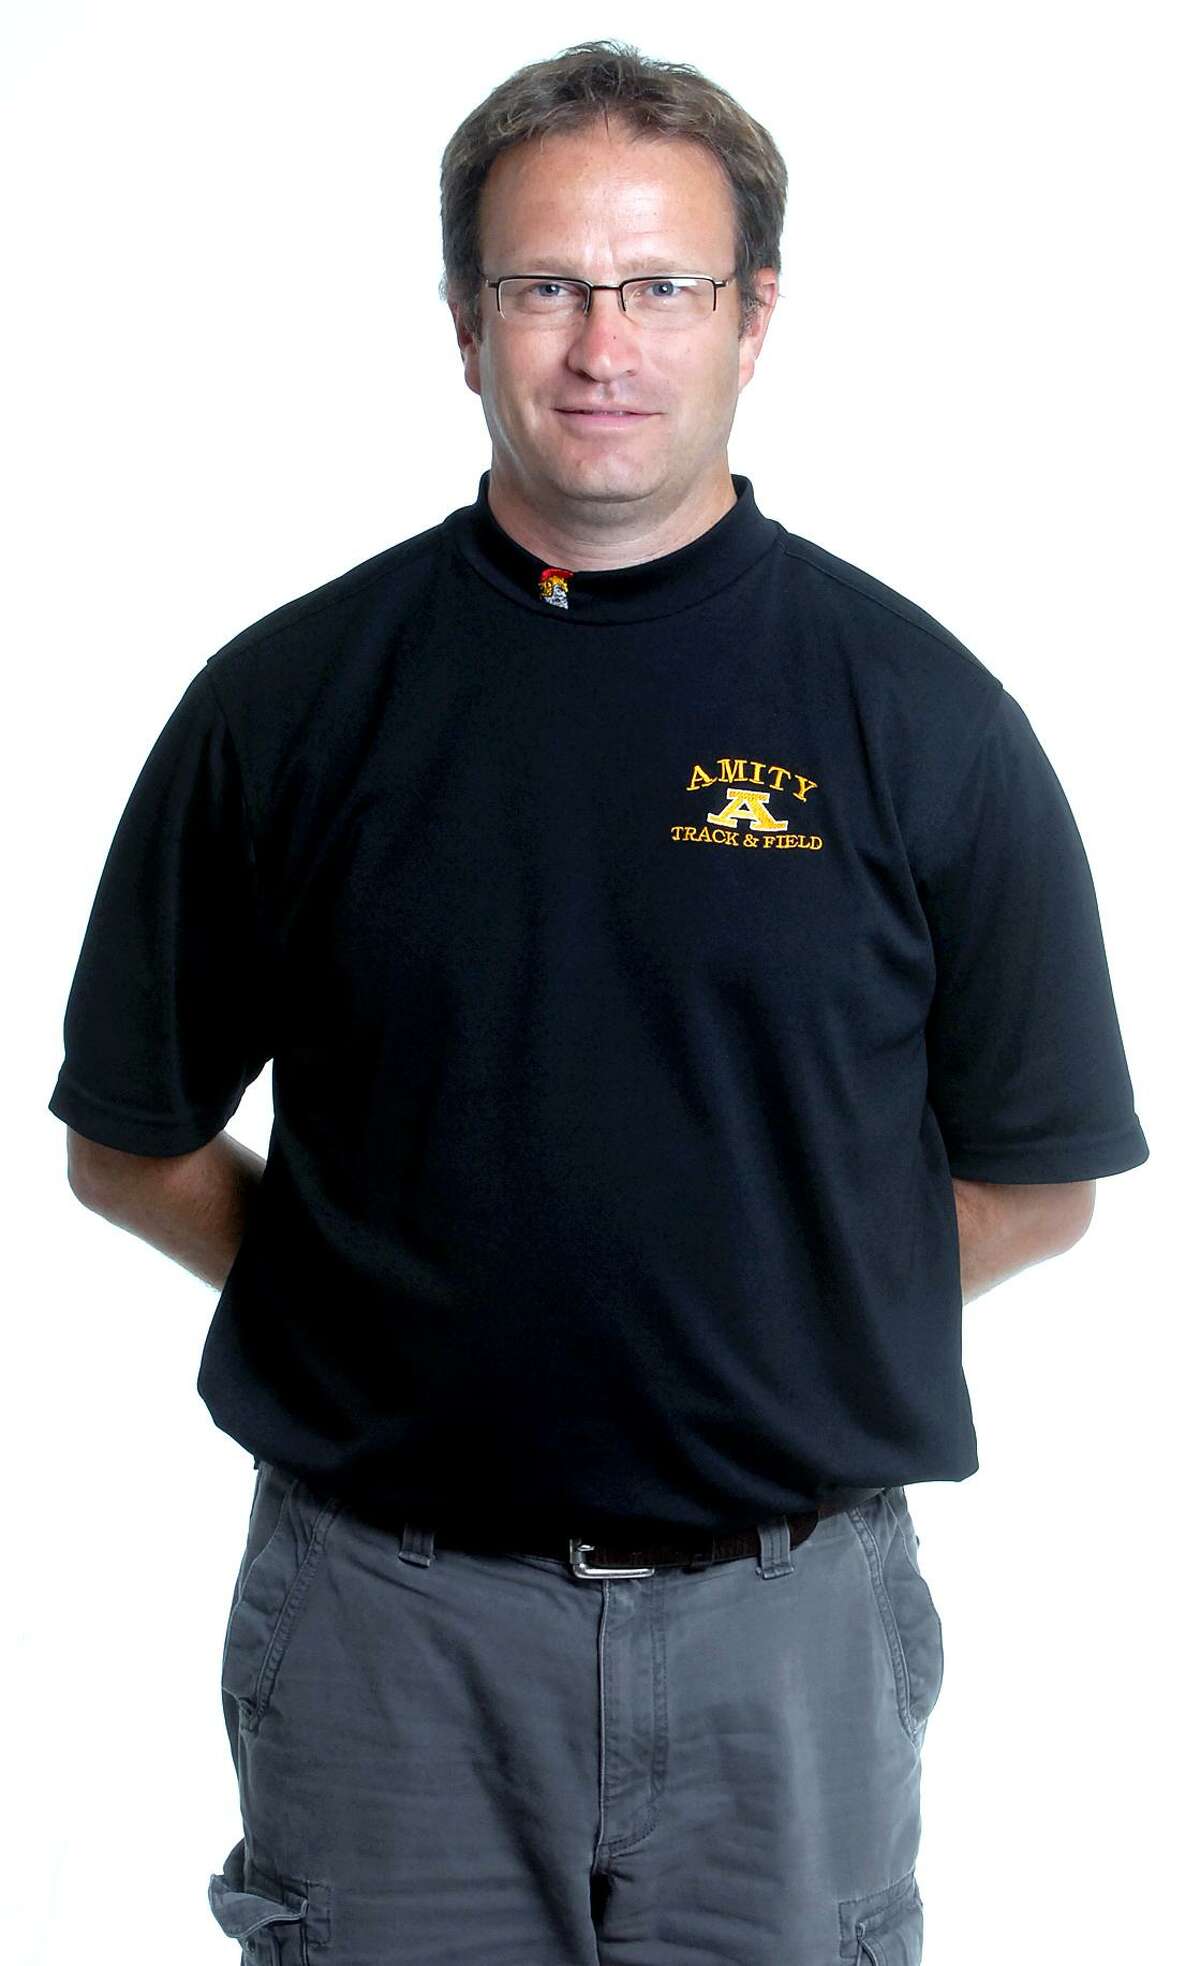 Thom Jacobs will be inducted to the Amity High School Hall of Fame on Oct. 18. Jacobs coached boys indoor and outdoor track for the Spartans.